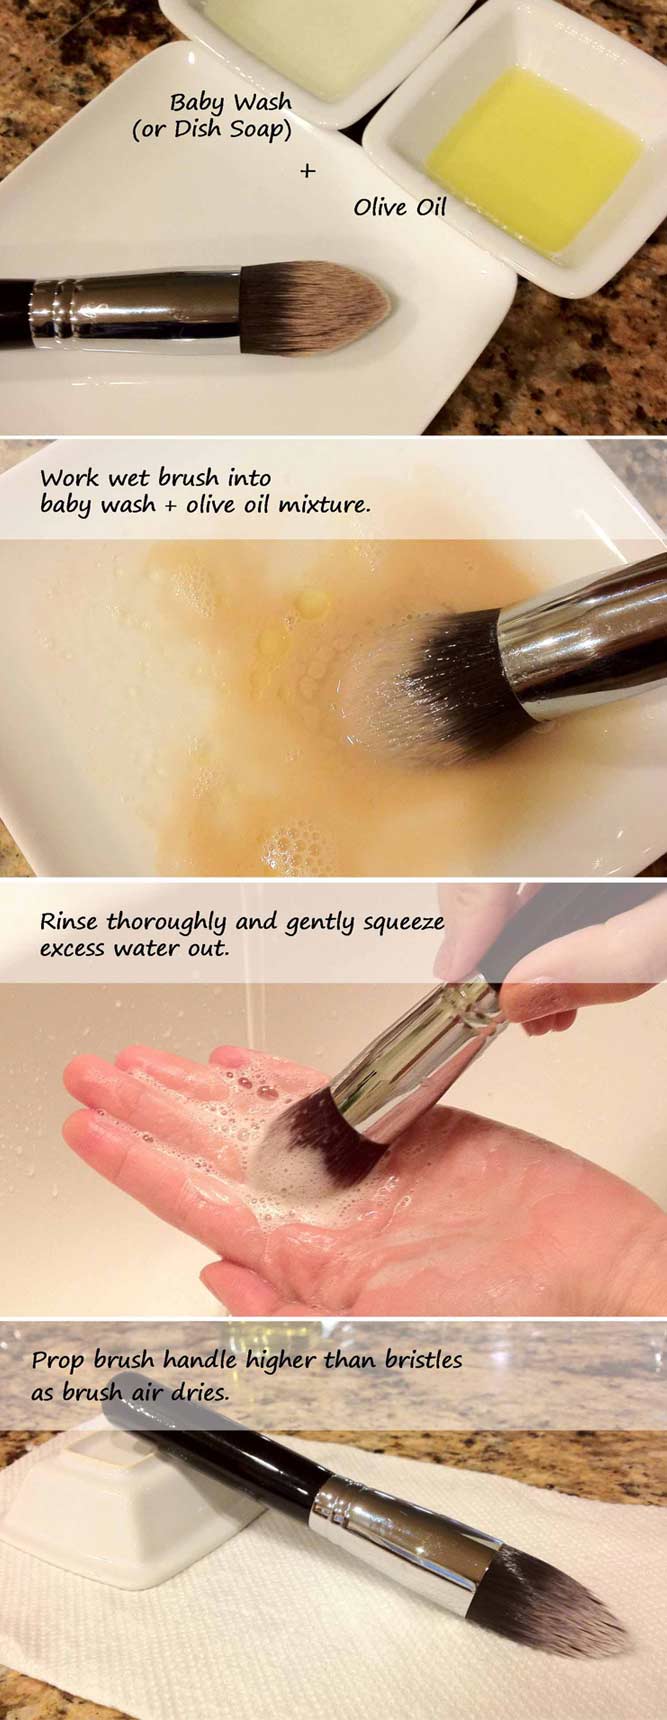 Clean Your Brushes Properly